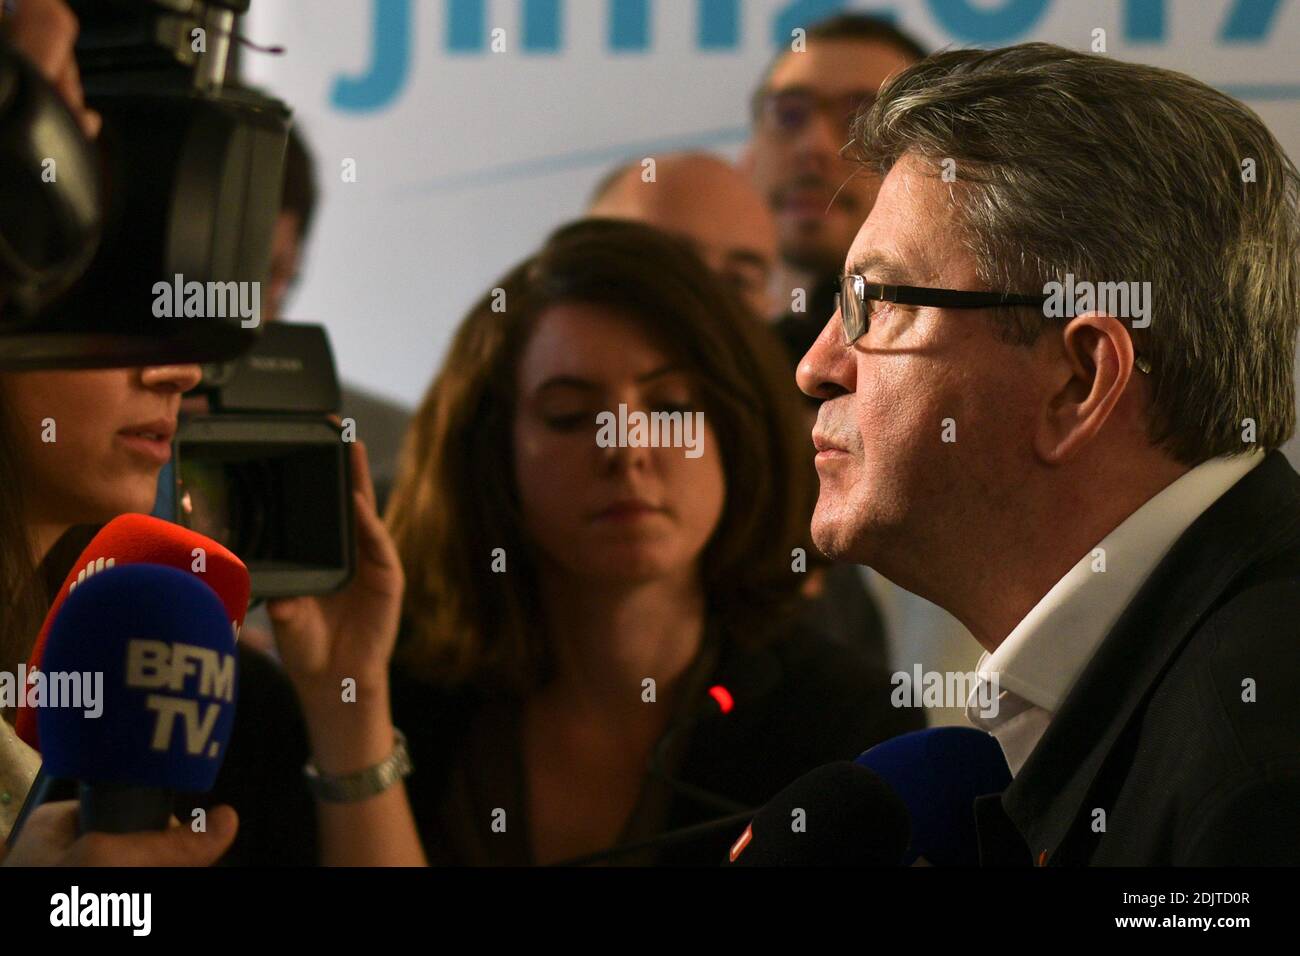 Jean-Luc Melenchon, founder of left-wing political movement La France insoumise and candidate for the 2017 presidential elections participates in a programmatic workshop on security, at his party's headquarters in Paris, France on November 10, 2016. Photo by Yann Korbi/ABACAPRESS.COM Stock Photo